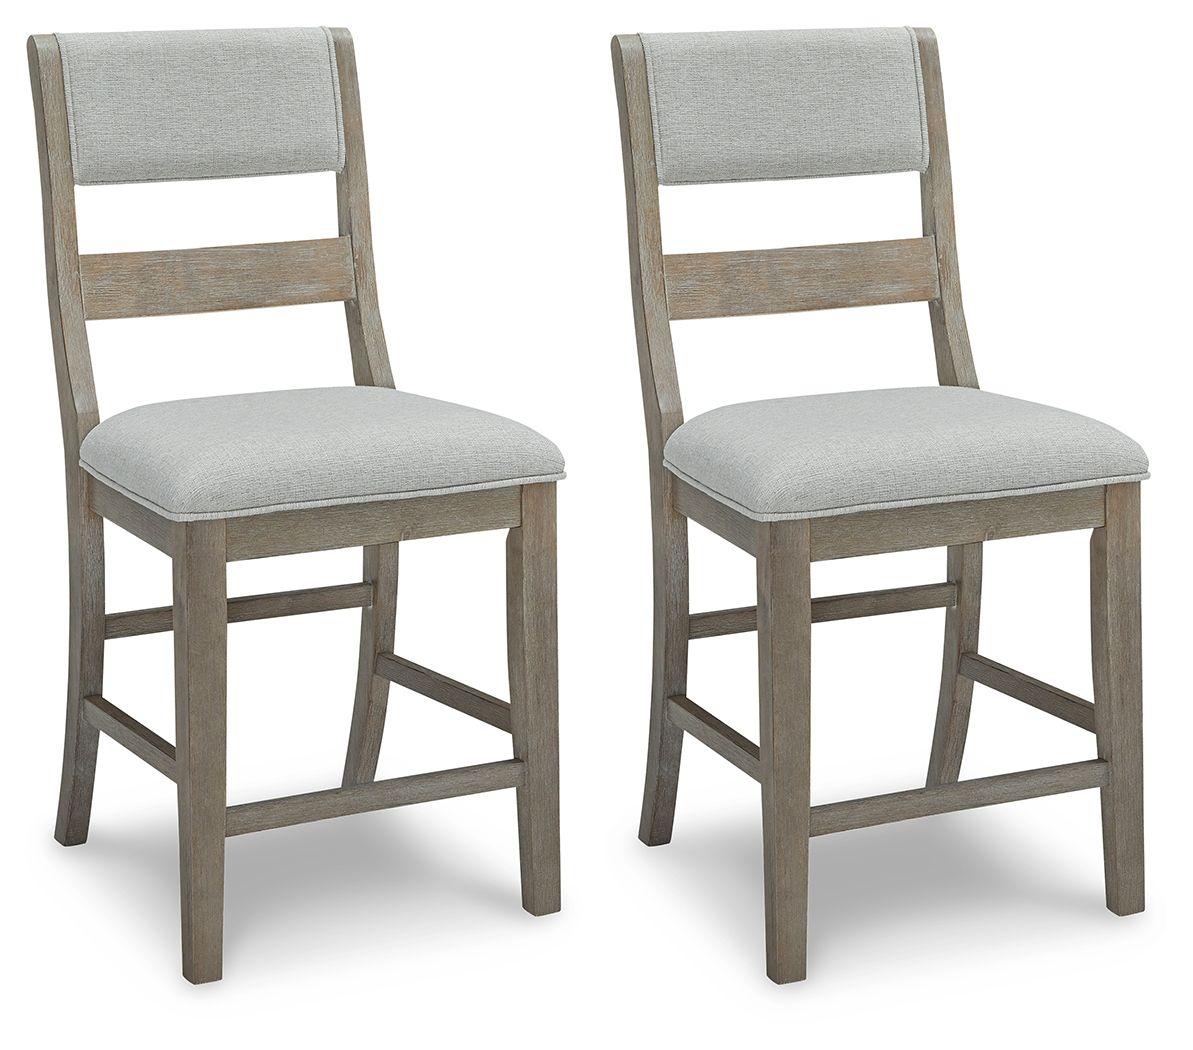 Signature Design by Ashley® - Moreshire - Bisque - Upholstered Barstool (Set of 2) - 5th Avenue Furniture